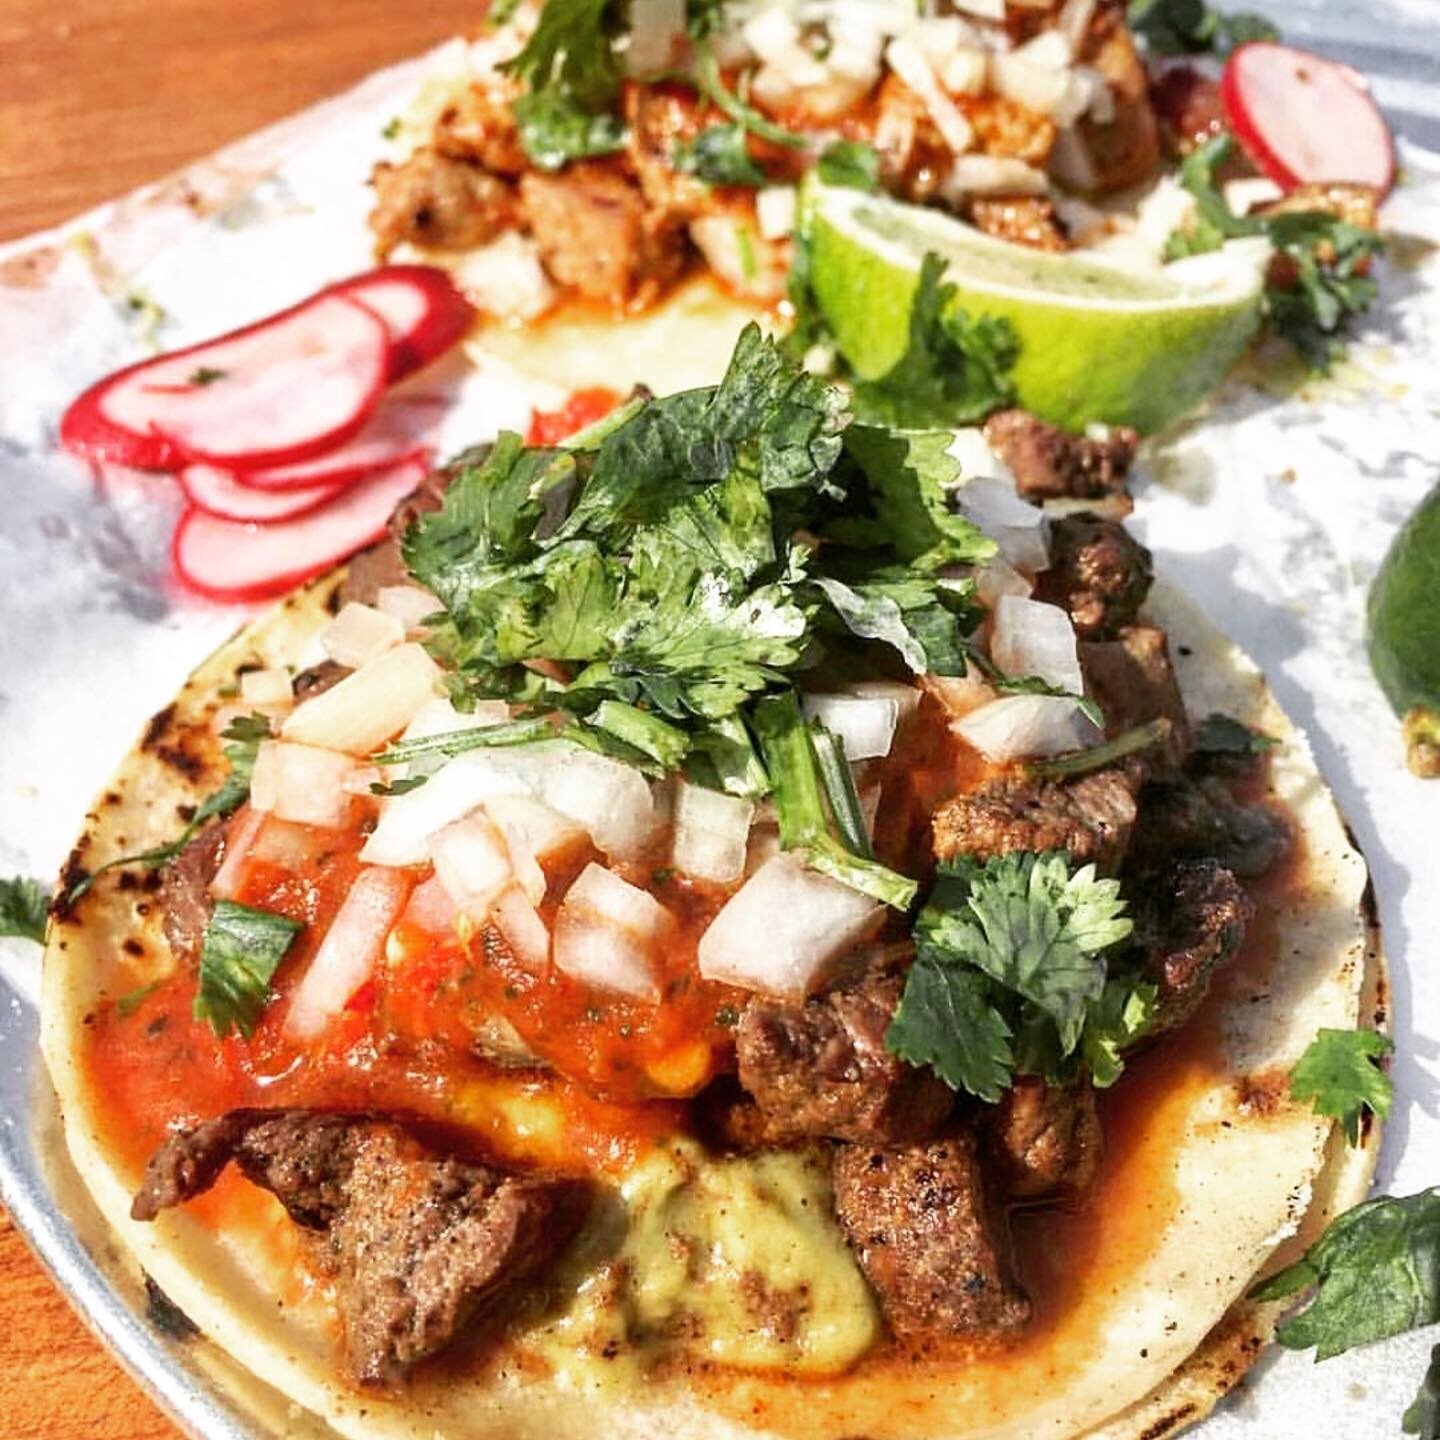 You know what today is!
#tacotuesday 
📸: @rifoodfights 
.
.
.
#rifood #rifoodie #bostonfoodies #tallulahstaqueria #providenceeats